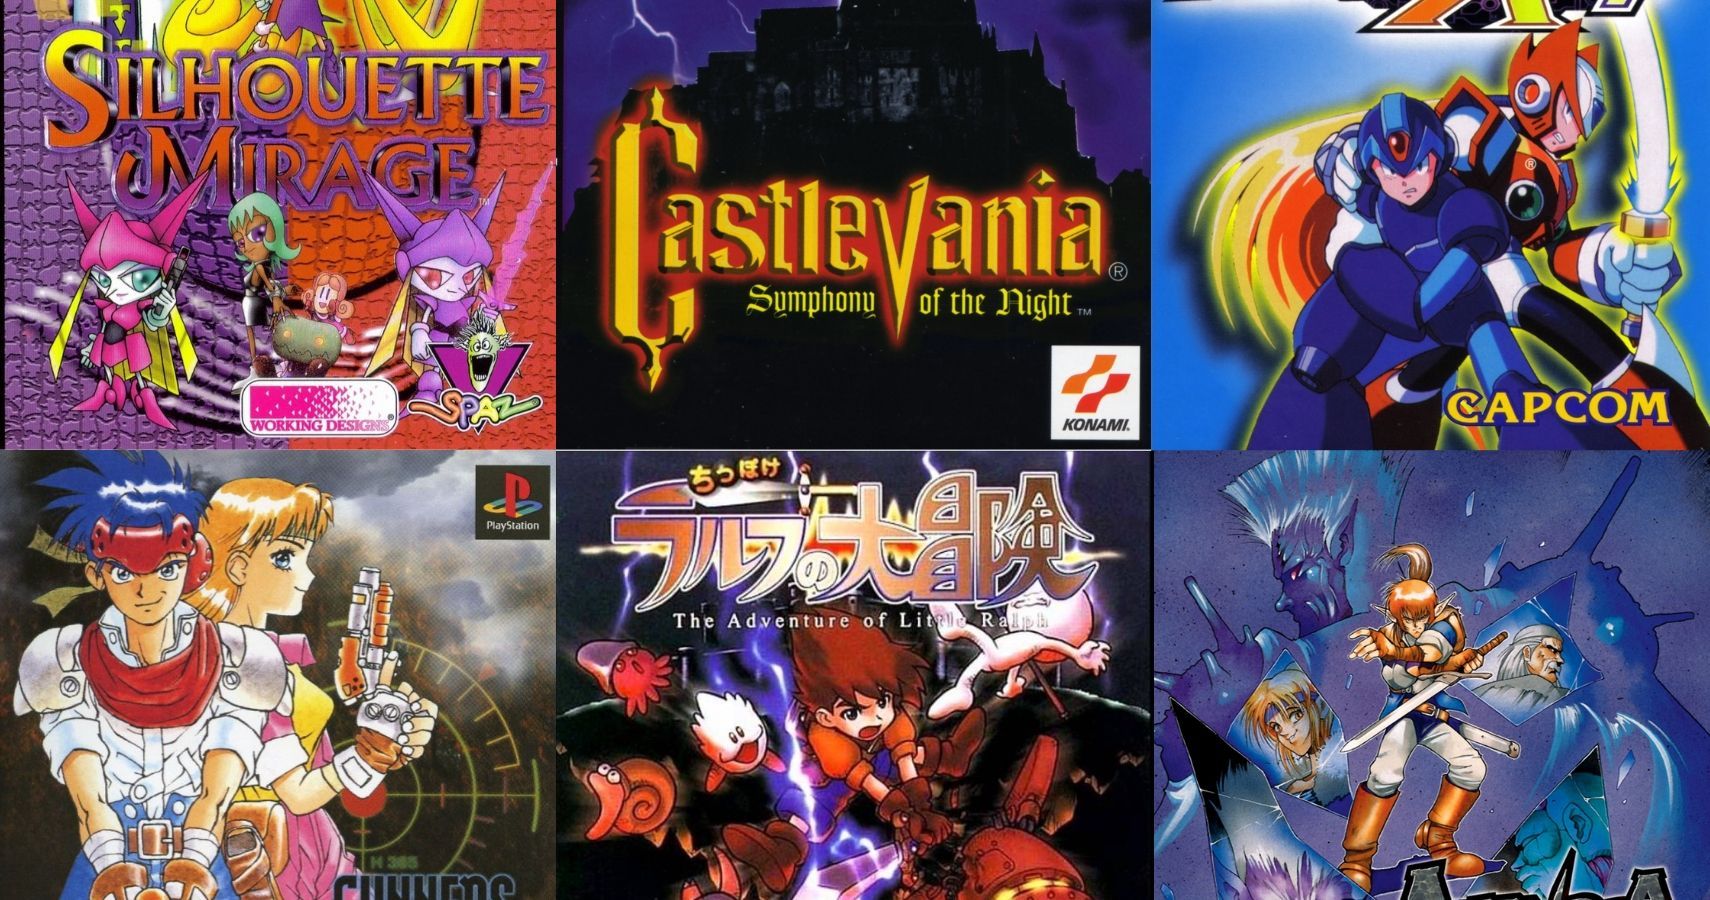 The best PS1 games of all time: PlayStation 1 classics, ranked